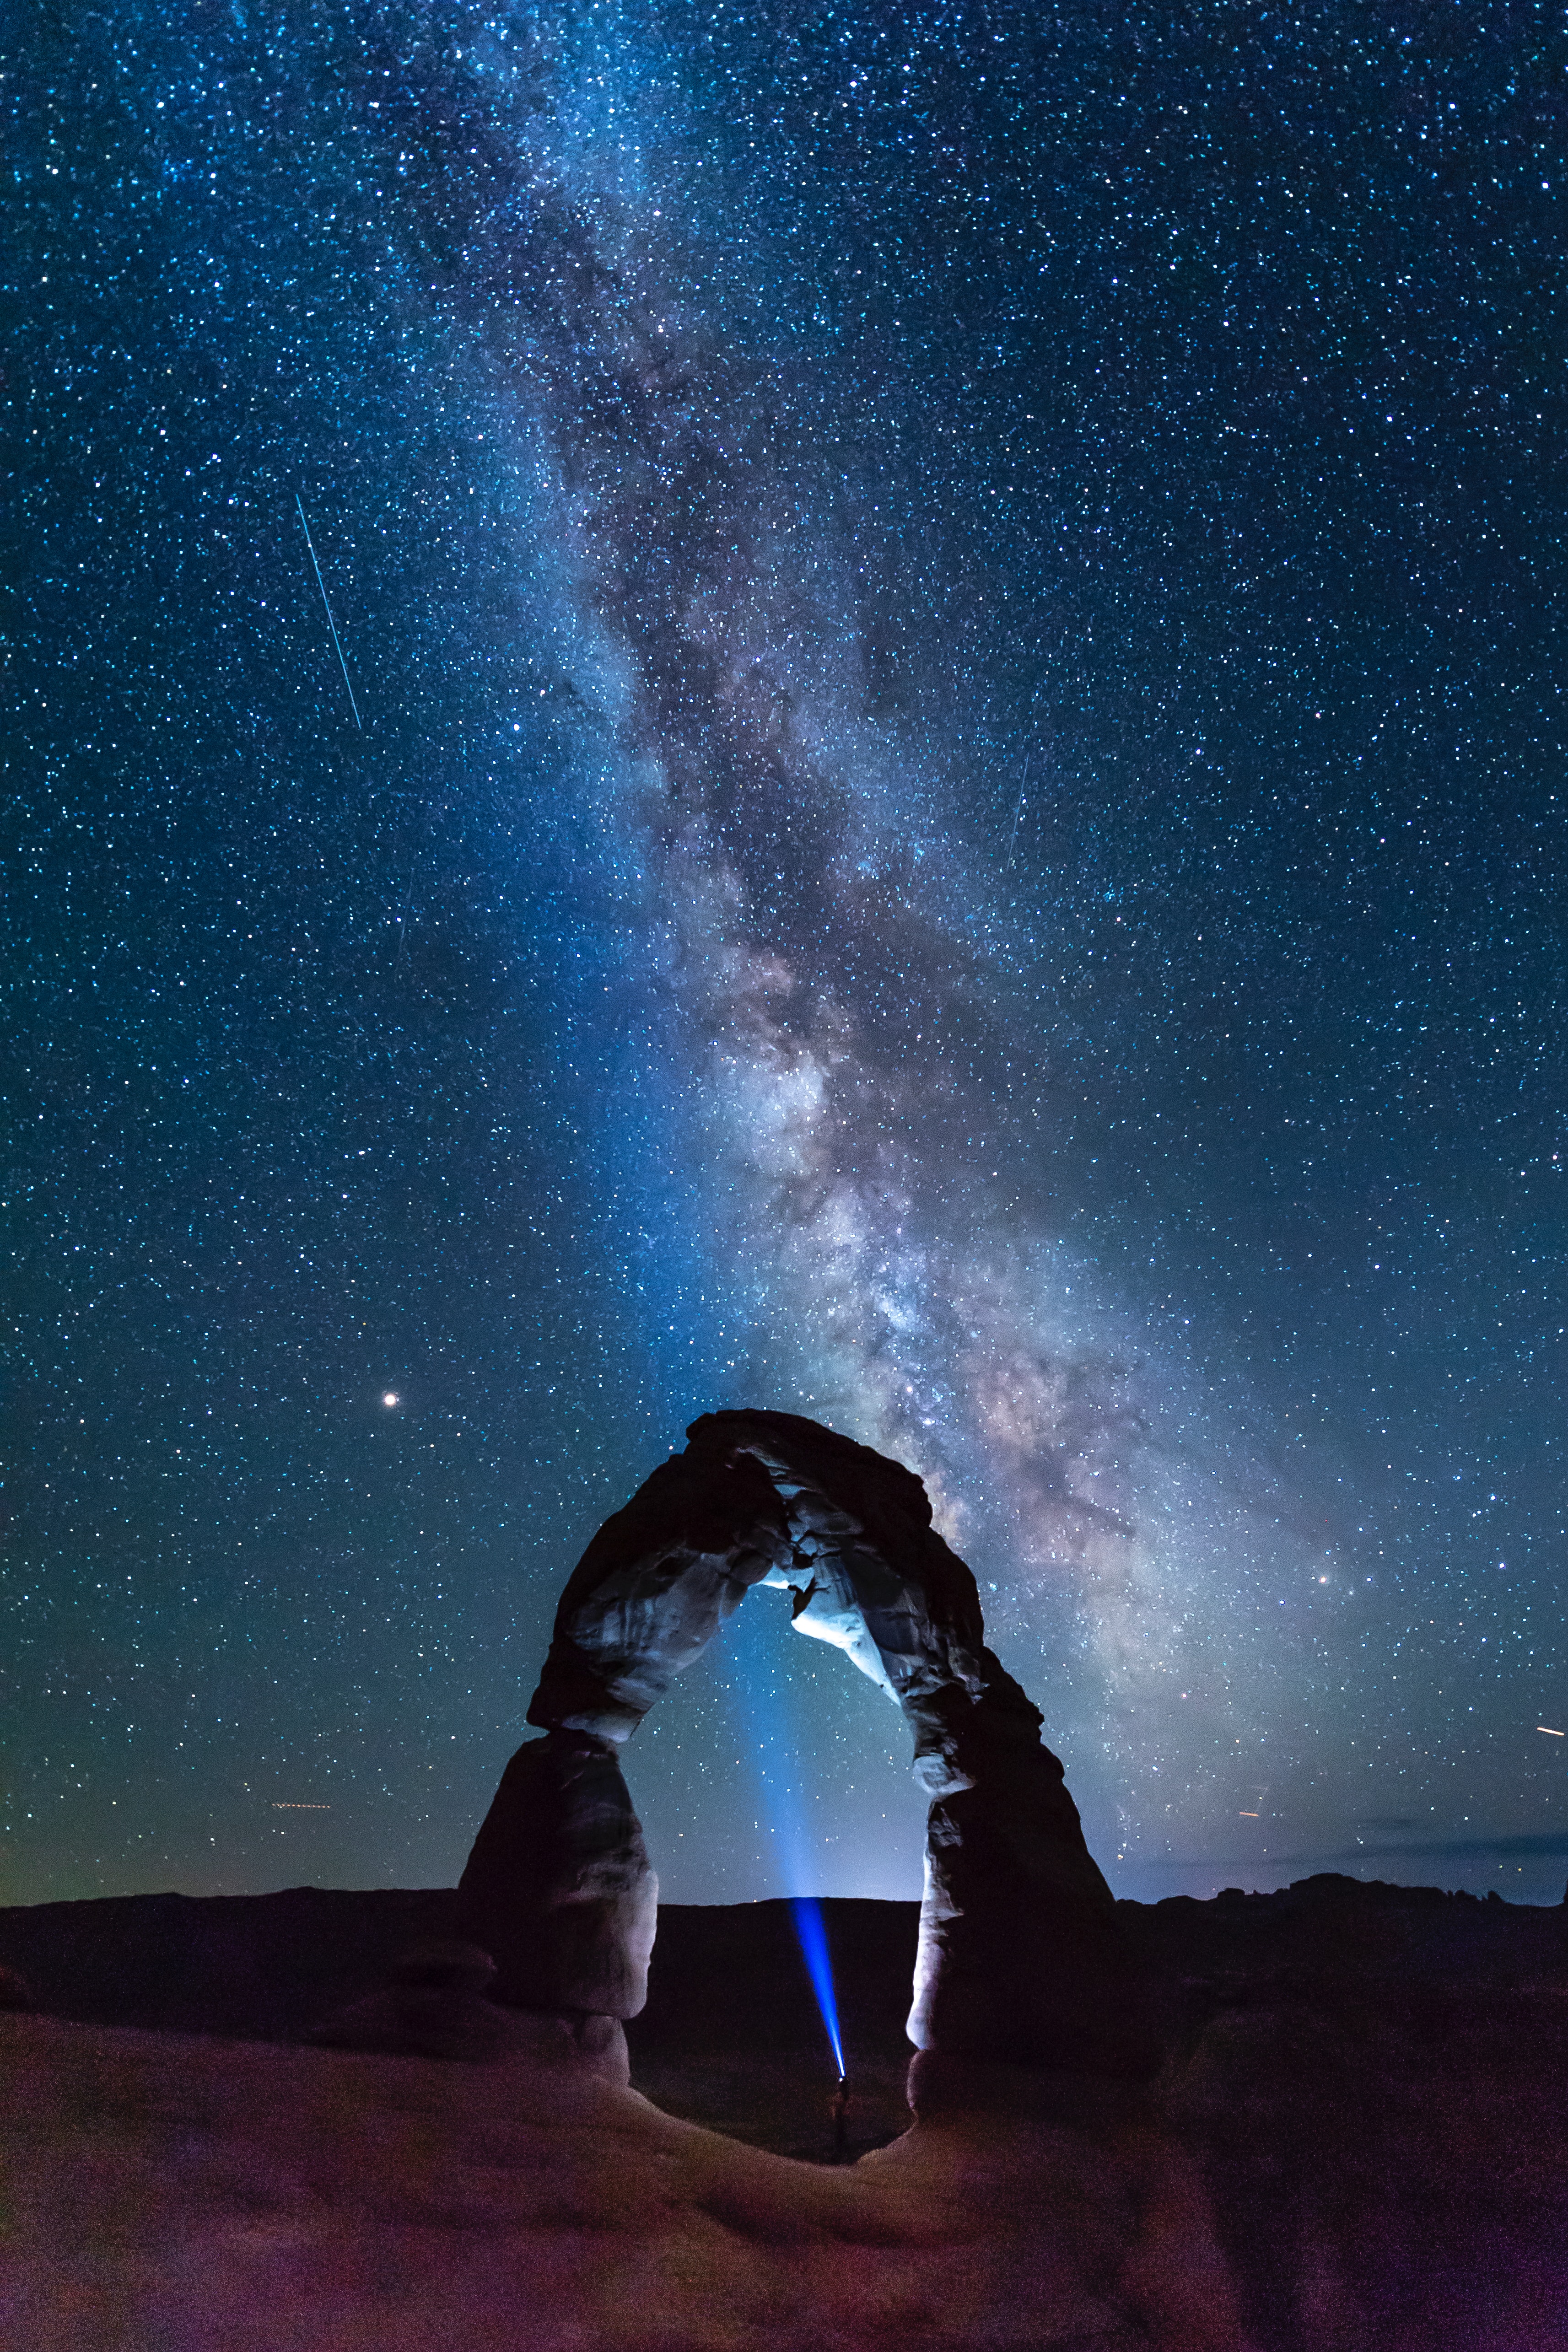 starry sky, nature, night, stone, arch cellphone